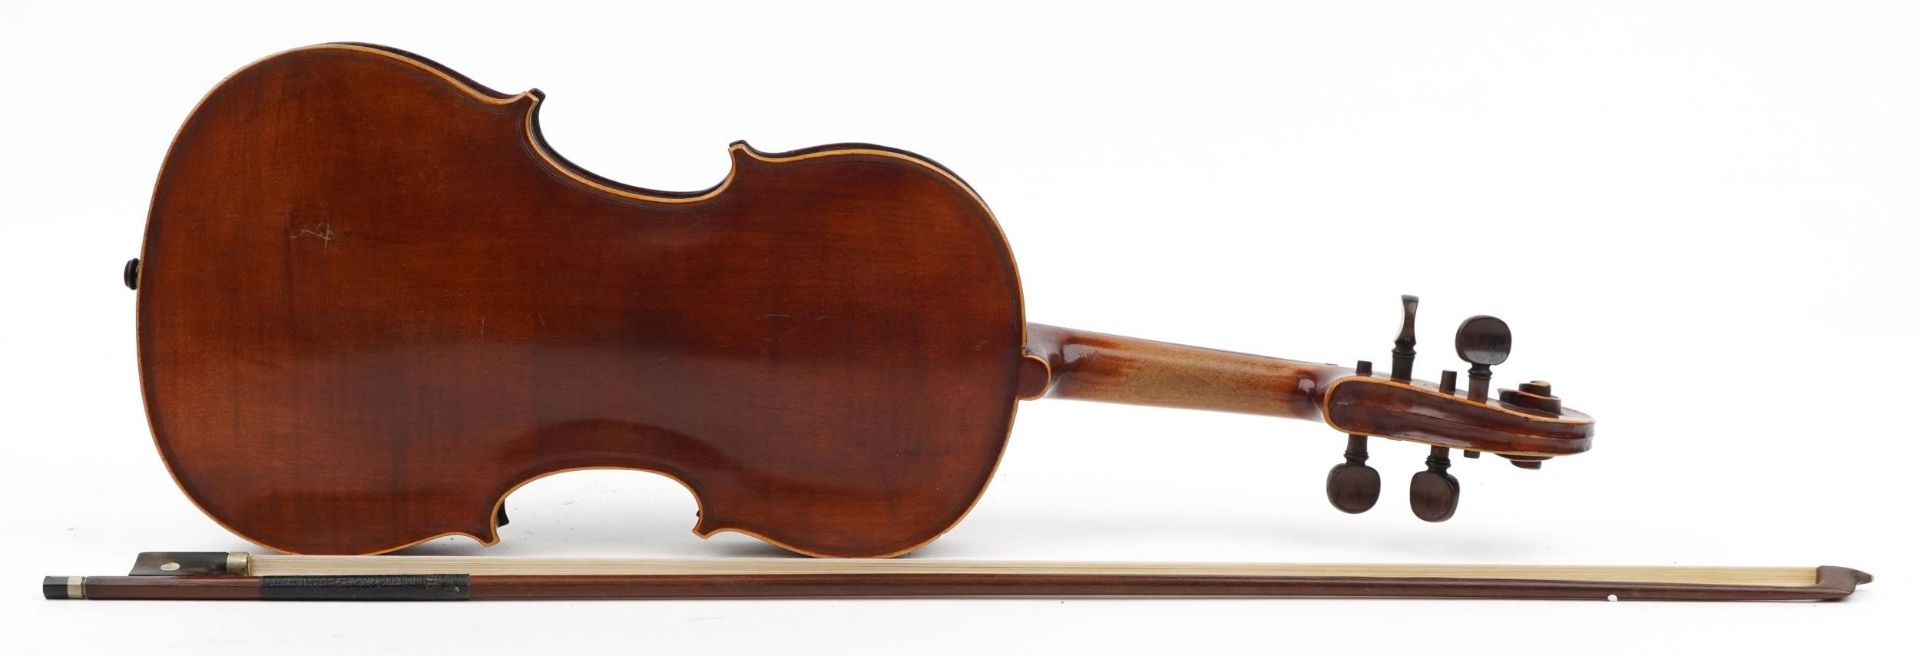 Old wooden violin with one piece back, the violin with rosewood mount and fitted carrying case, - Image 3 of 12